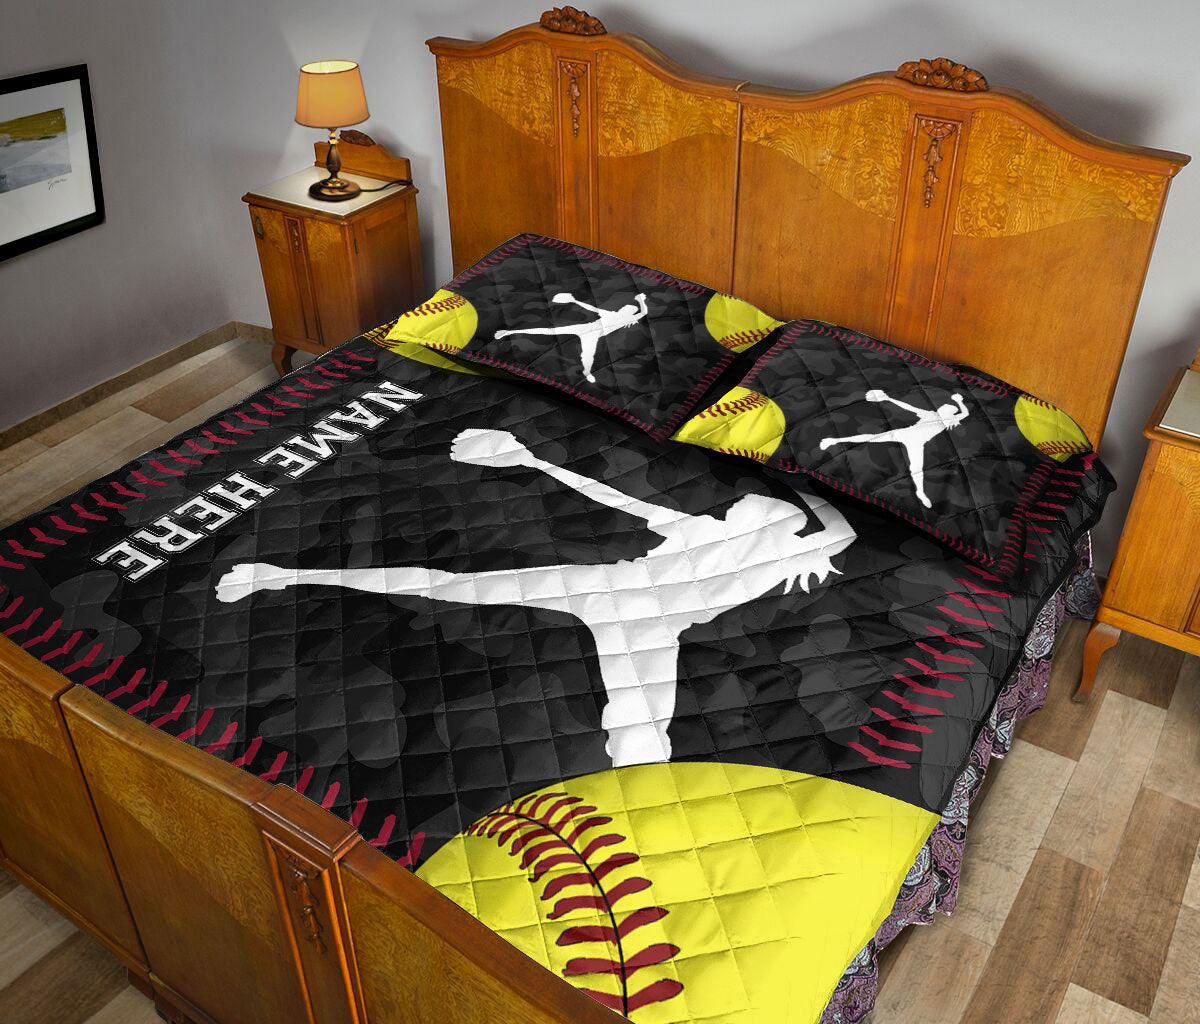 Ohaprints-Quilt-Bed-Set-Pillowcase-Softball-Pitcher-Yellow-Ball-Sport-Lover-Gift-Custom-Personalized-Name-Number-Blanket-Bedspread-Bedding-2914-King (90'' x 100'')